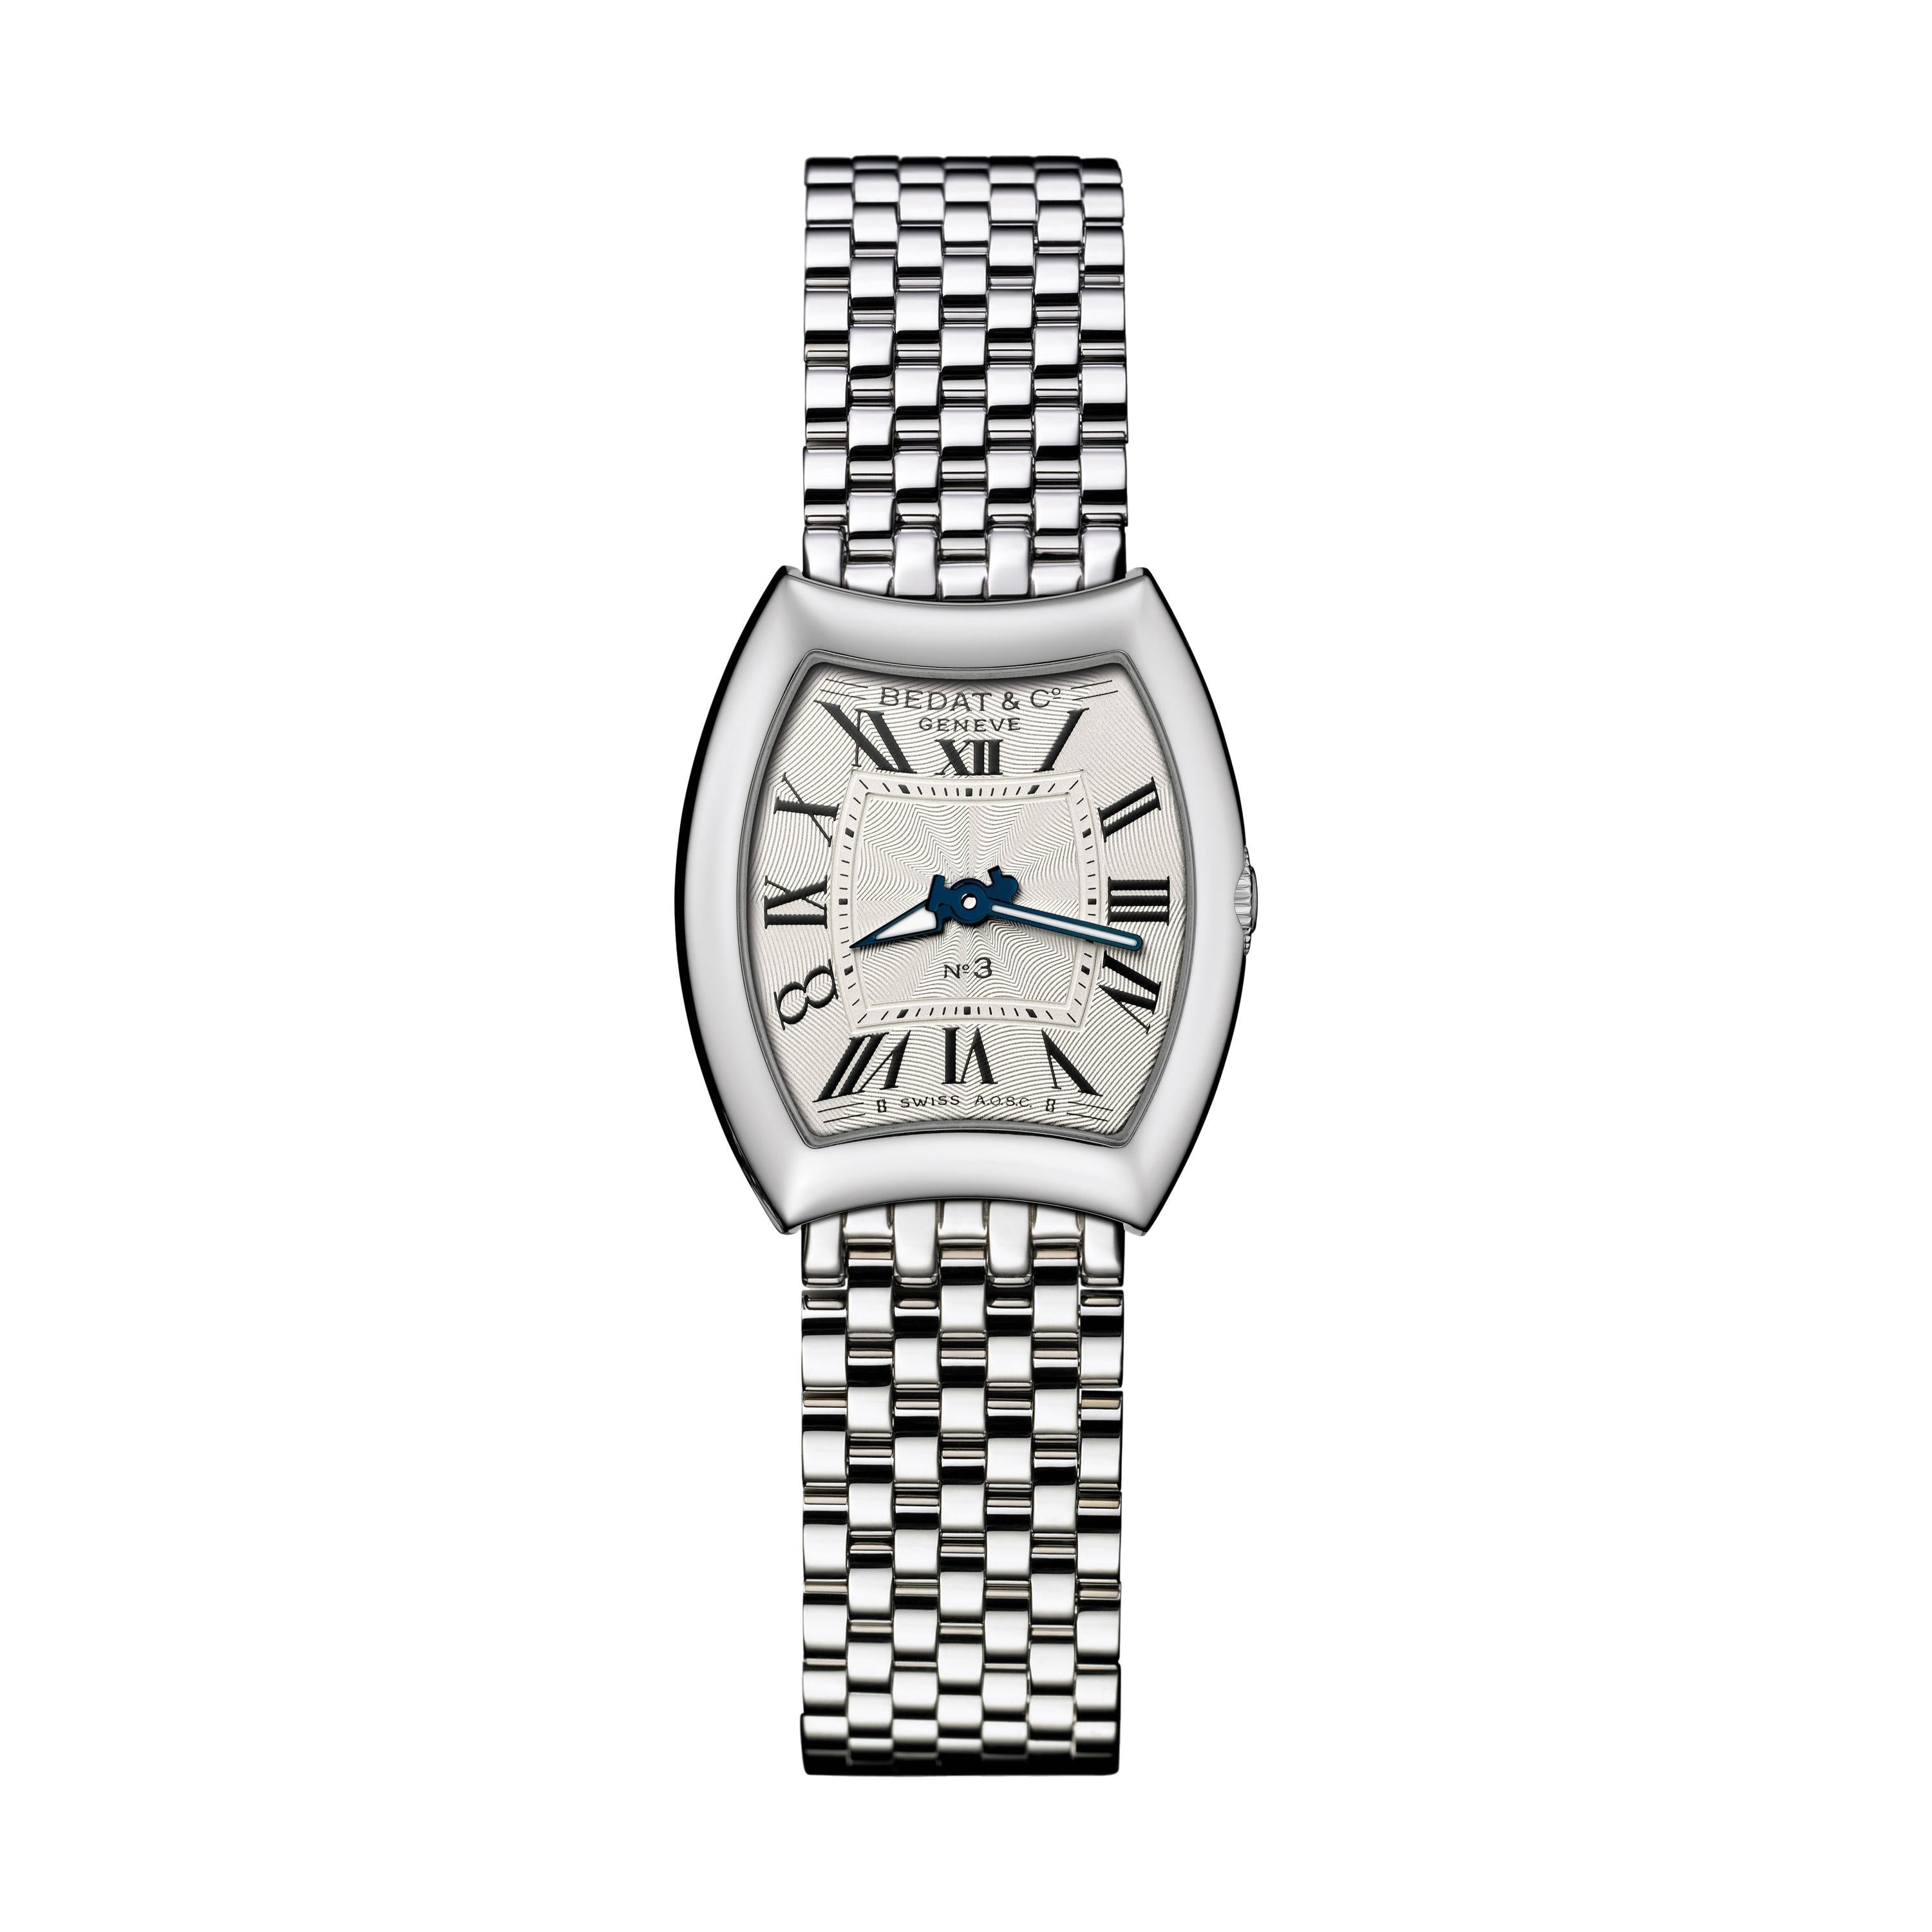 Bedat & Co. Geneve Lady's Watch No. 3 Style#305011100